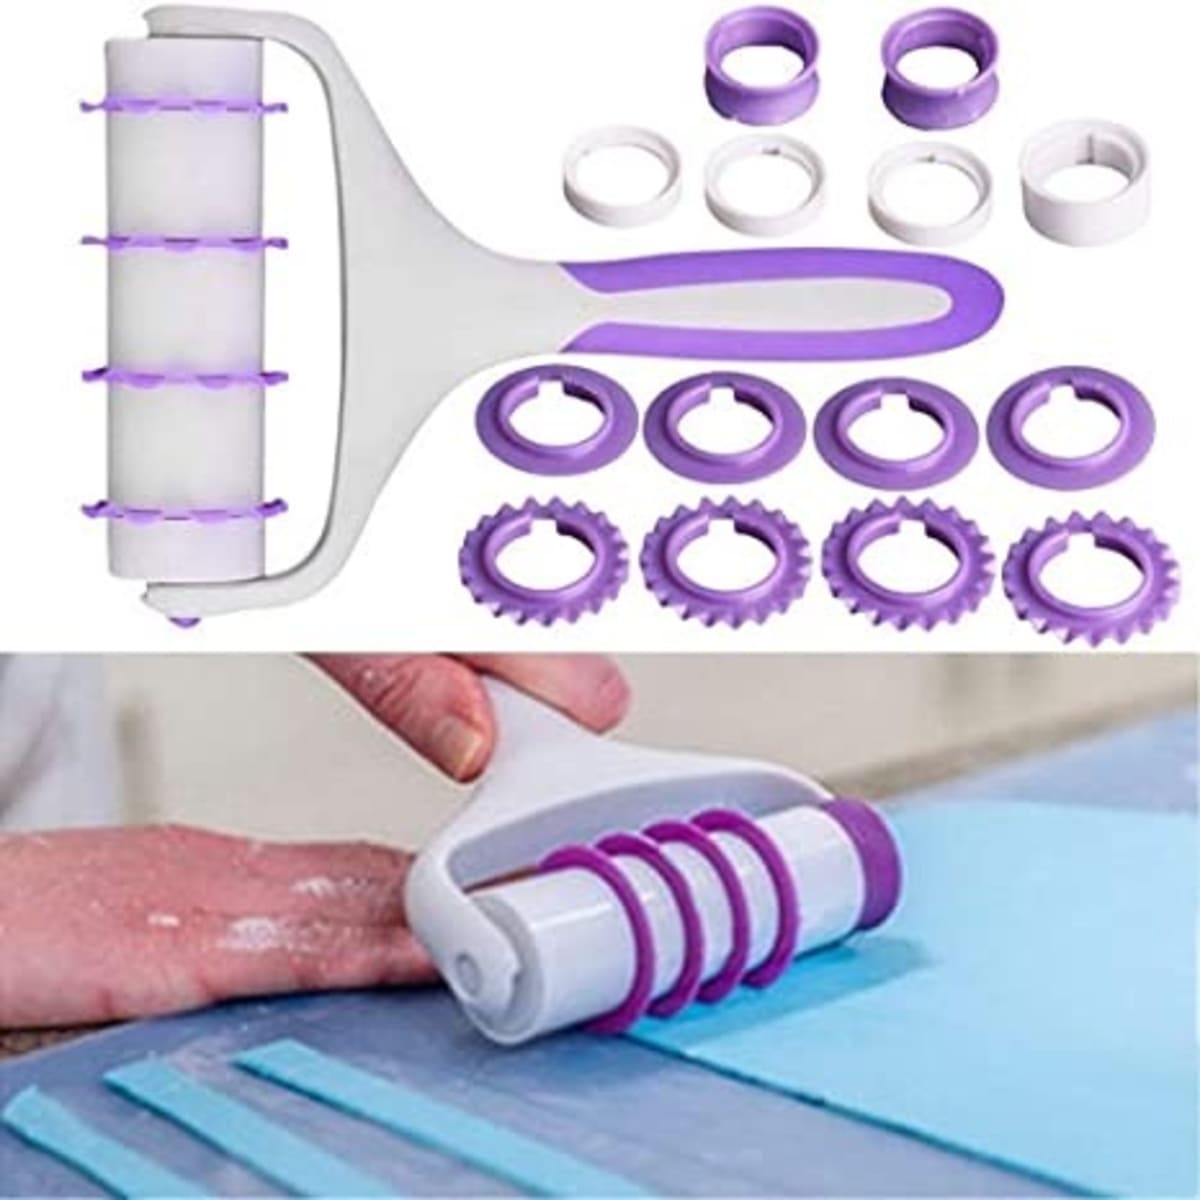 Cake Mad - Ribbon Cutter And Embosser Set - Cake Decorating Solutions